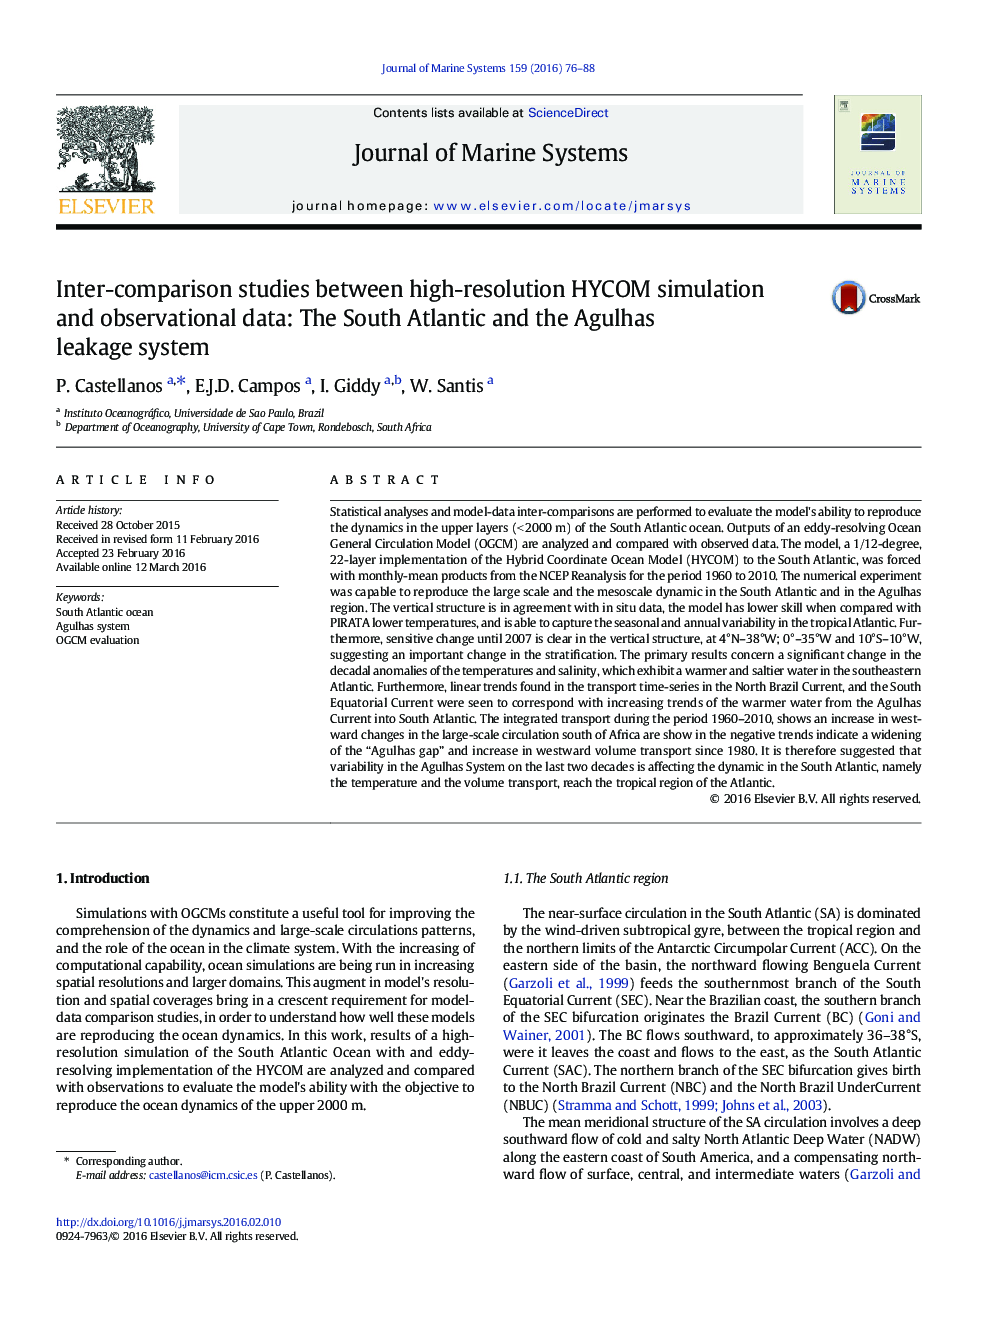 Inter-comparison studies between high-resolution HYCOM simulation and observational data: The South Atlantic and the Agulhas leakage system